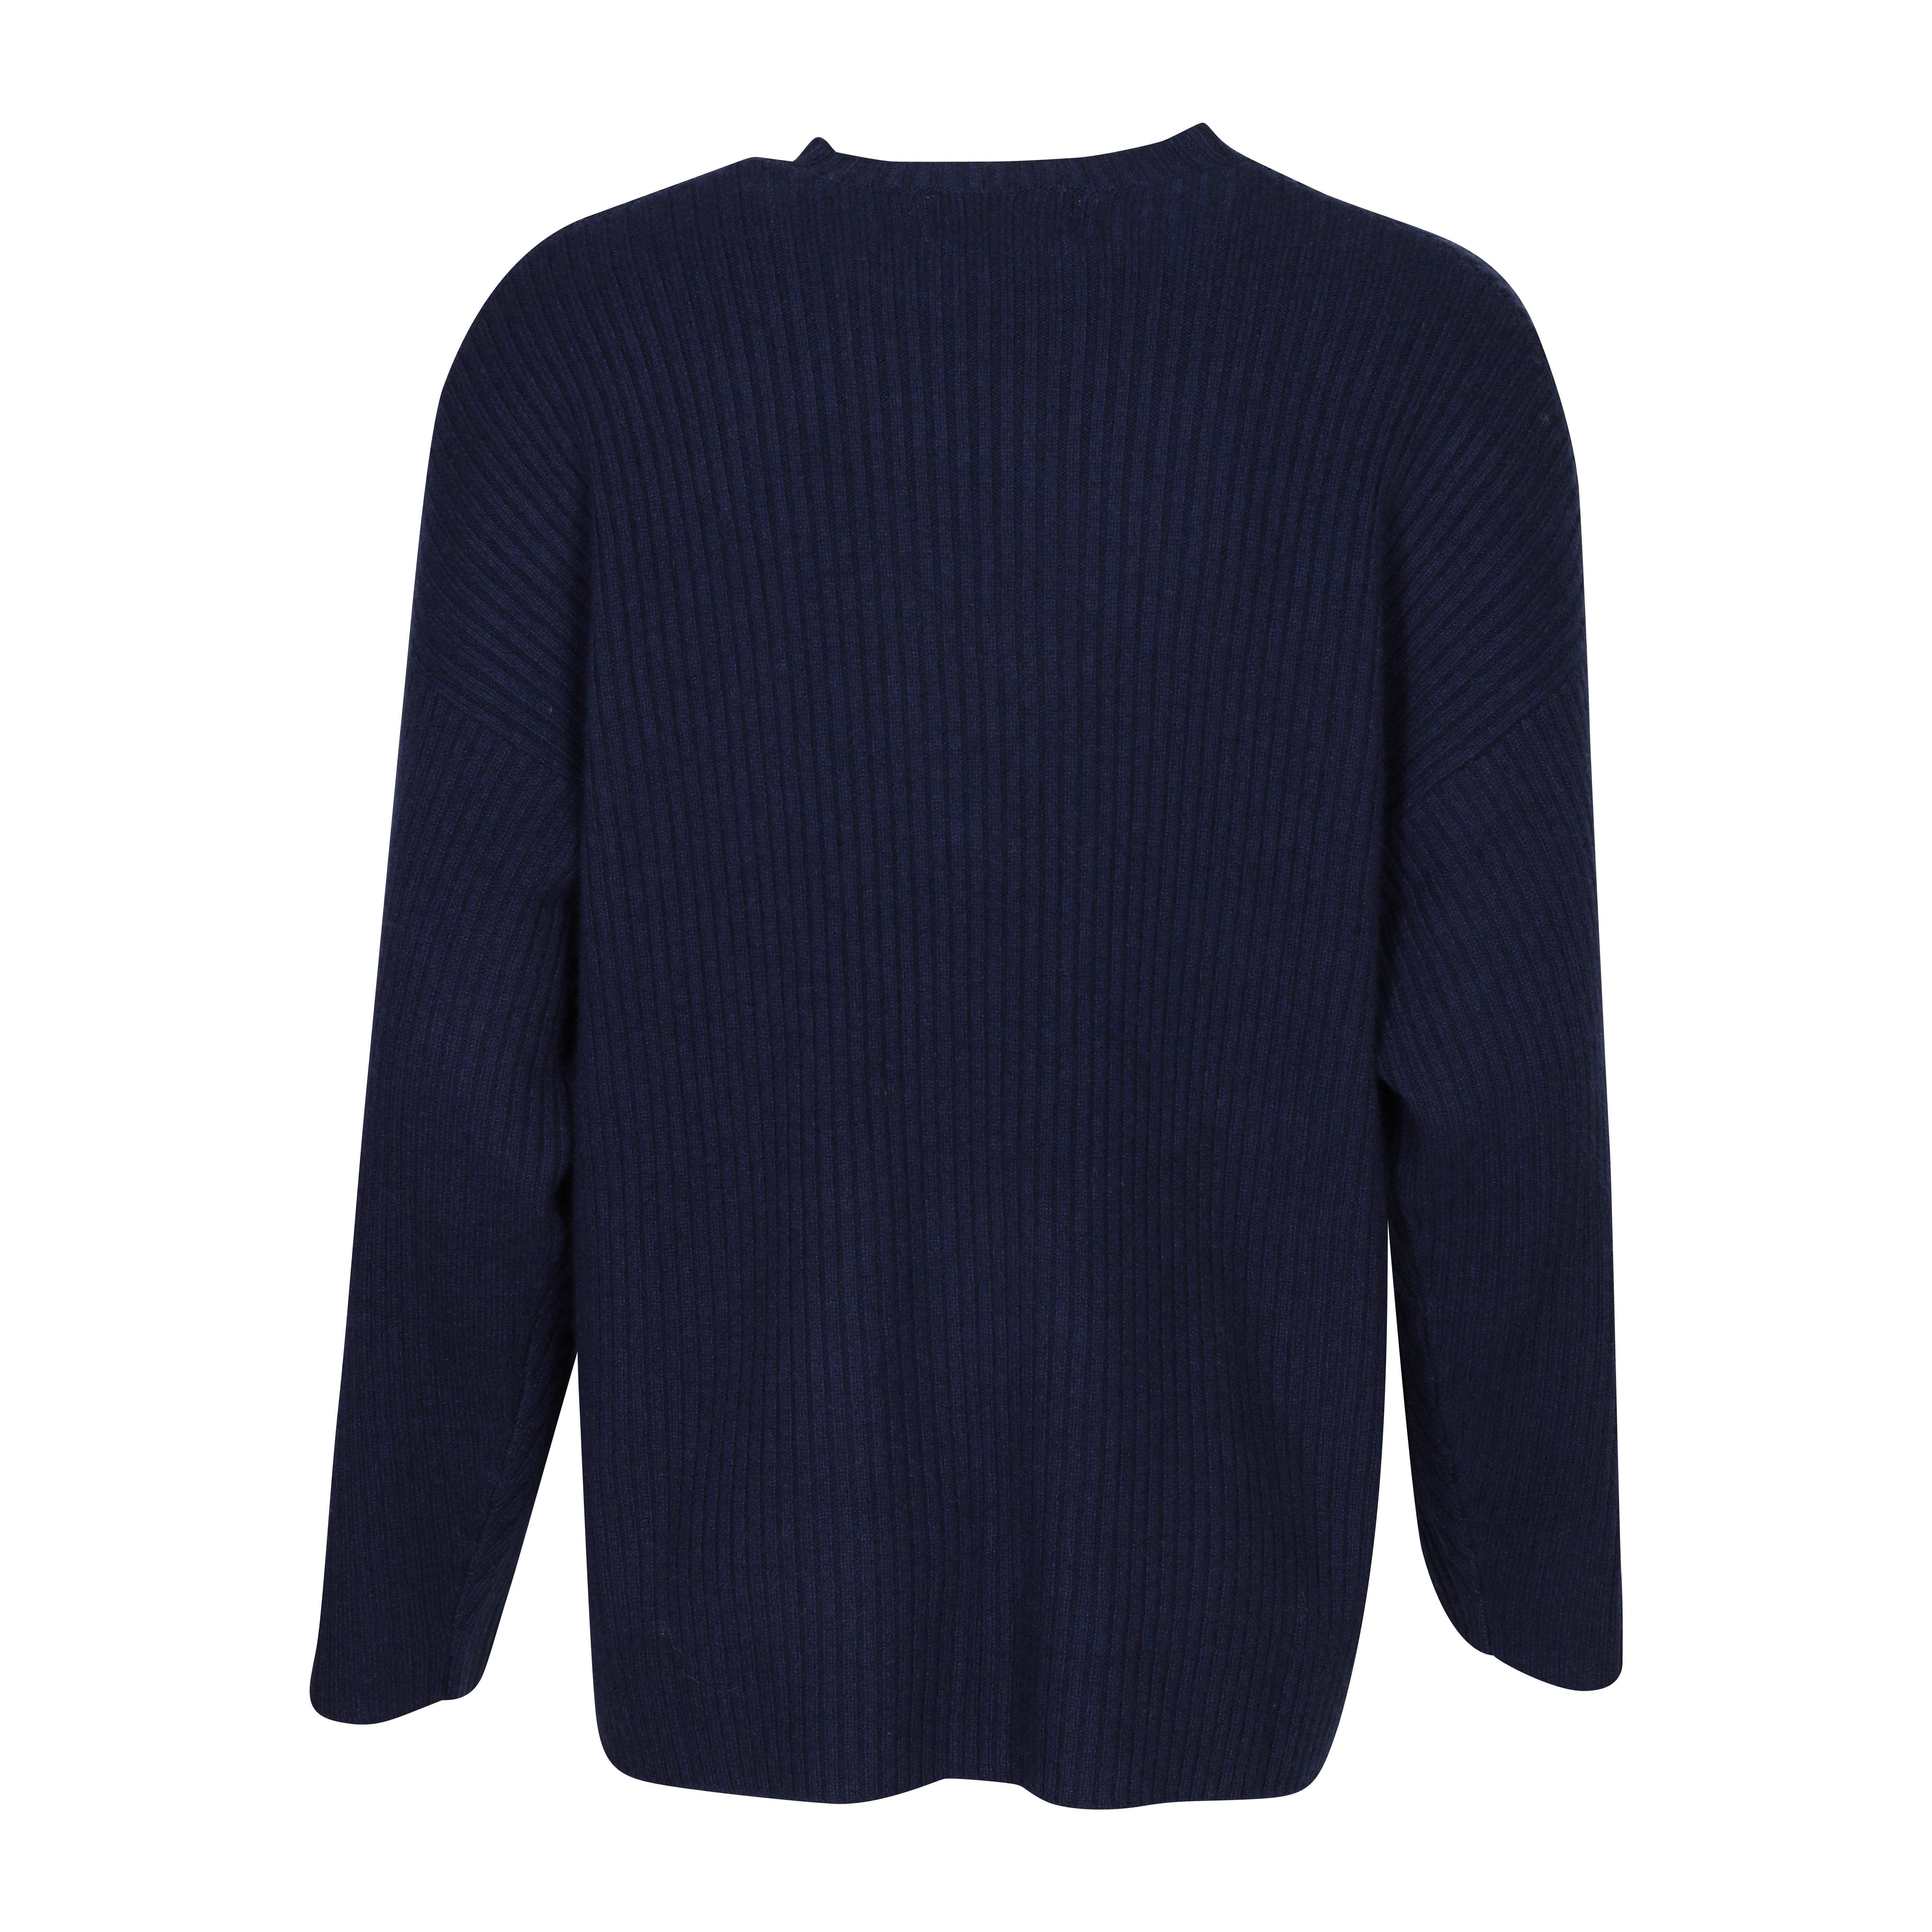 Flona Cashmere Rib Pullover in Navy